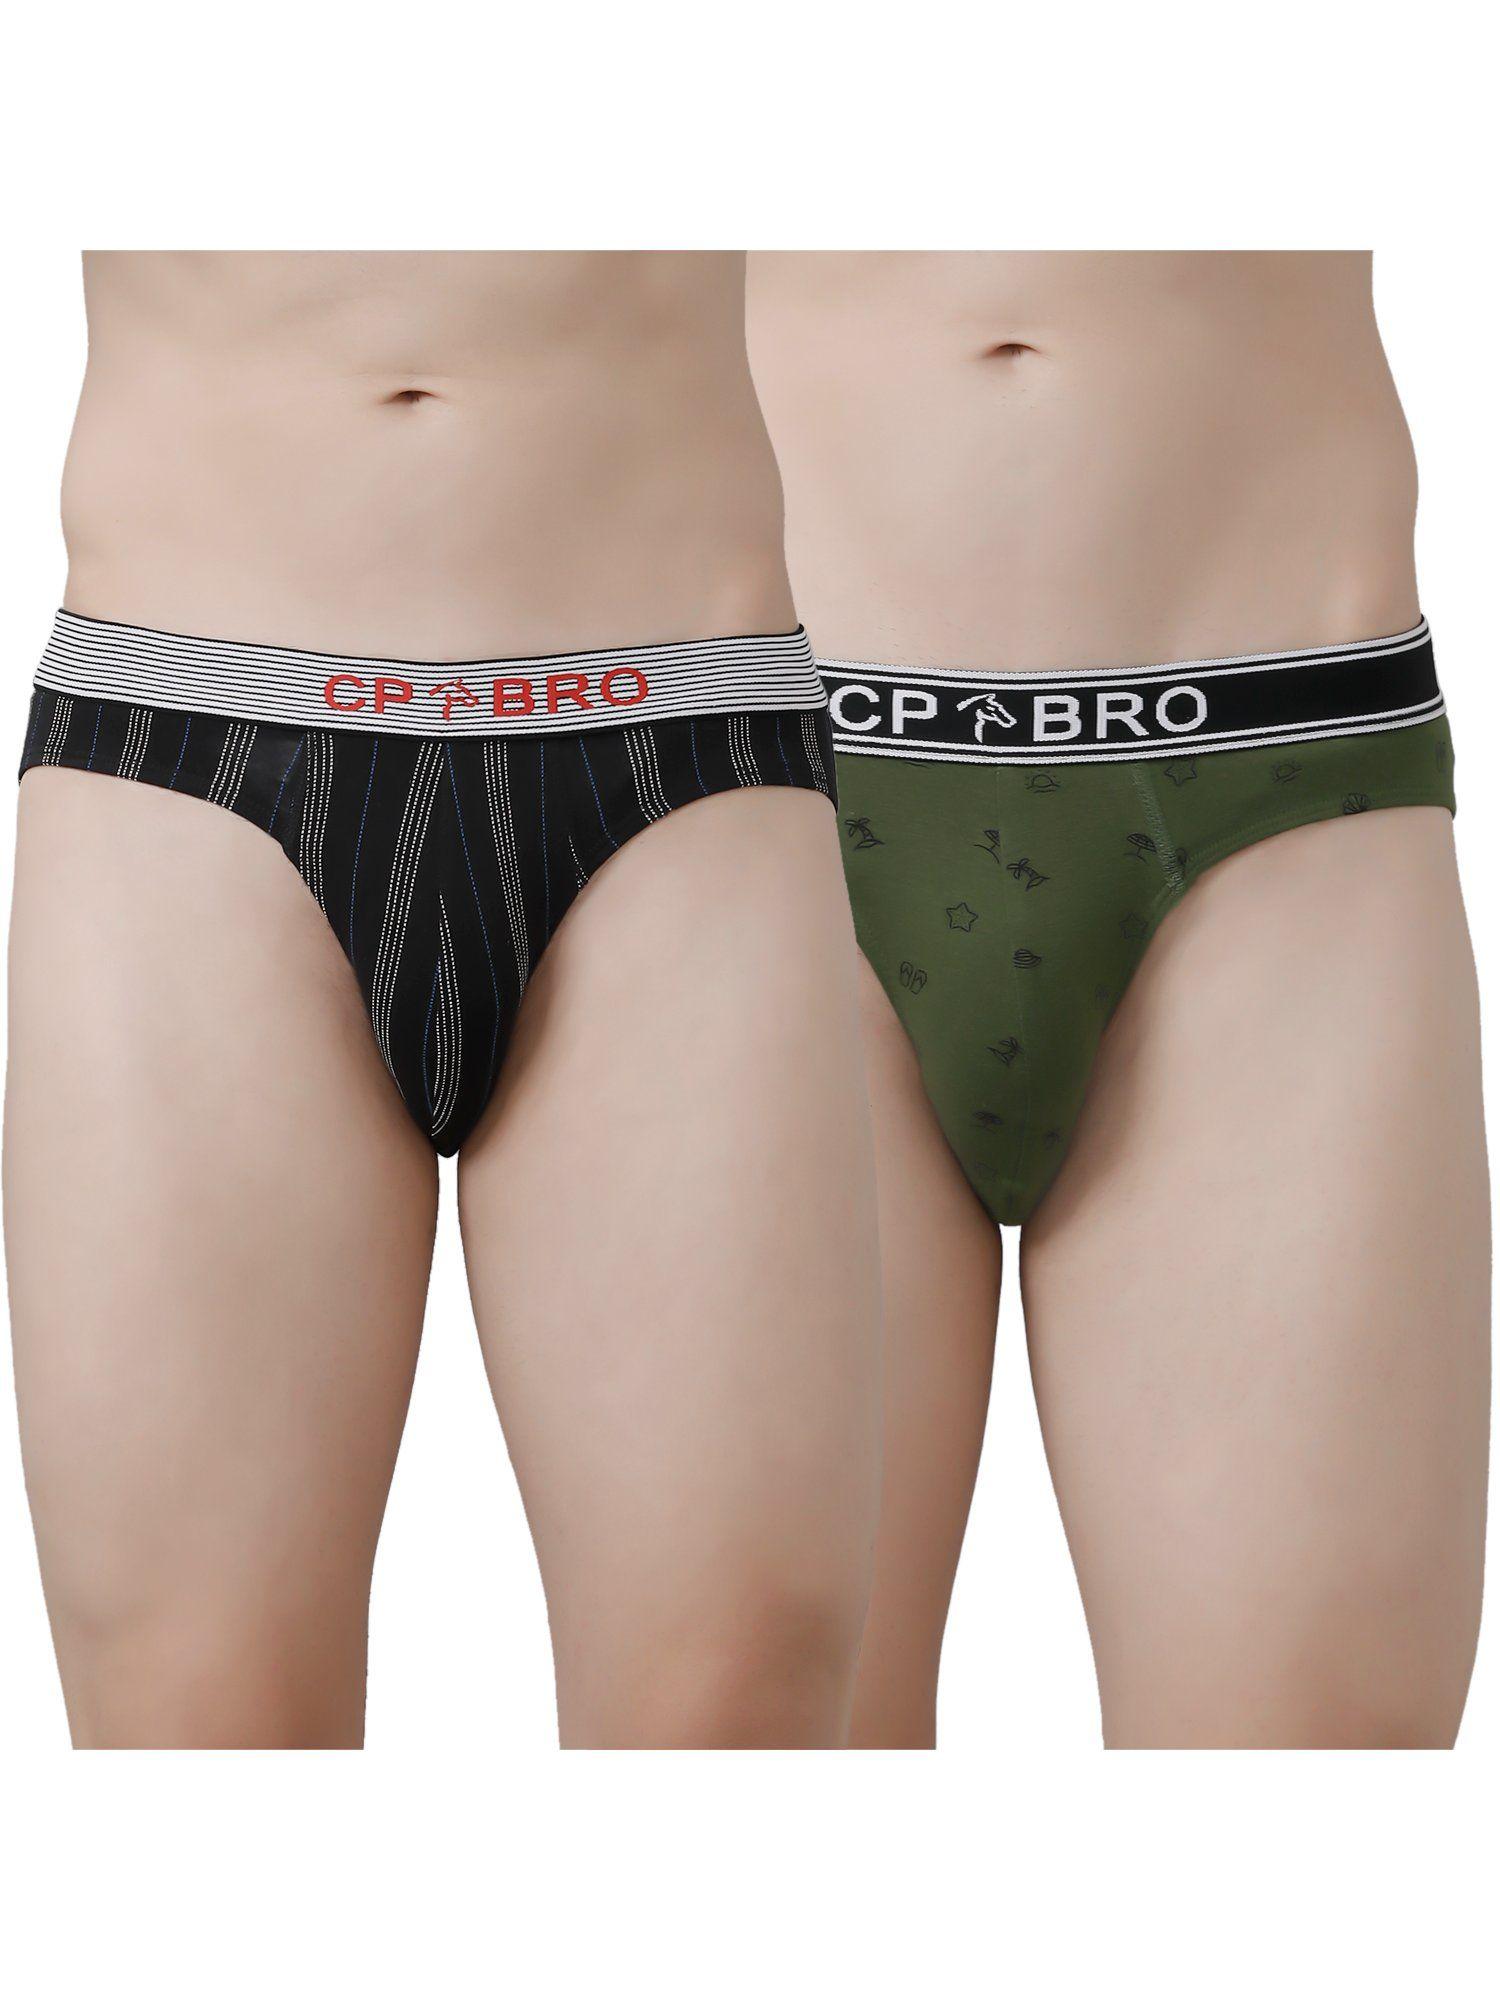 printed briefs with exposed waistband value - black stripe & olive green (pack of 2)